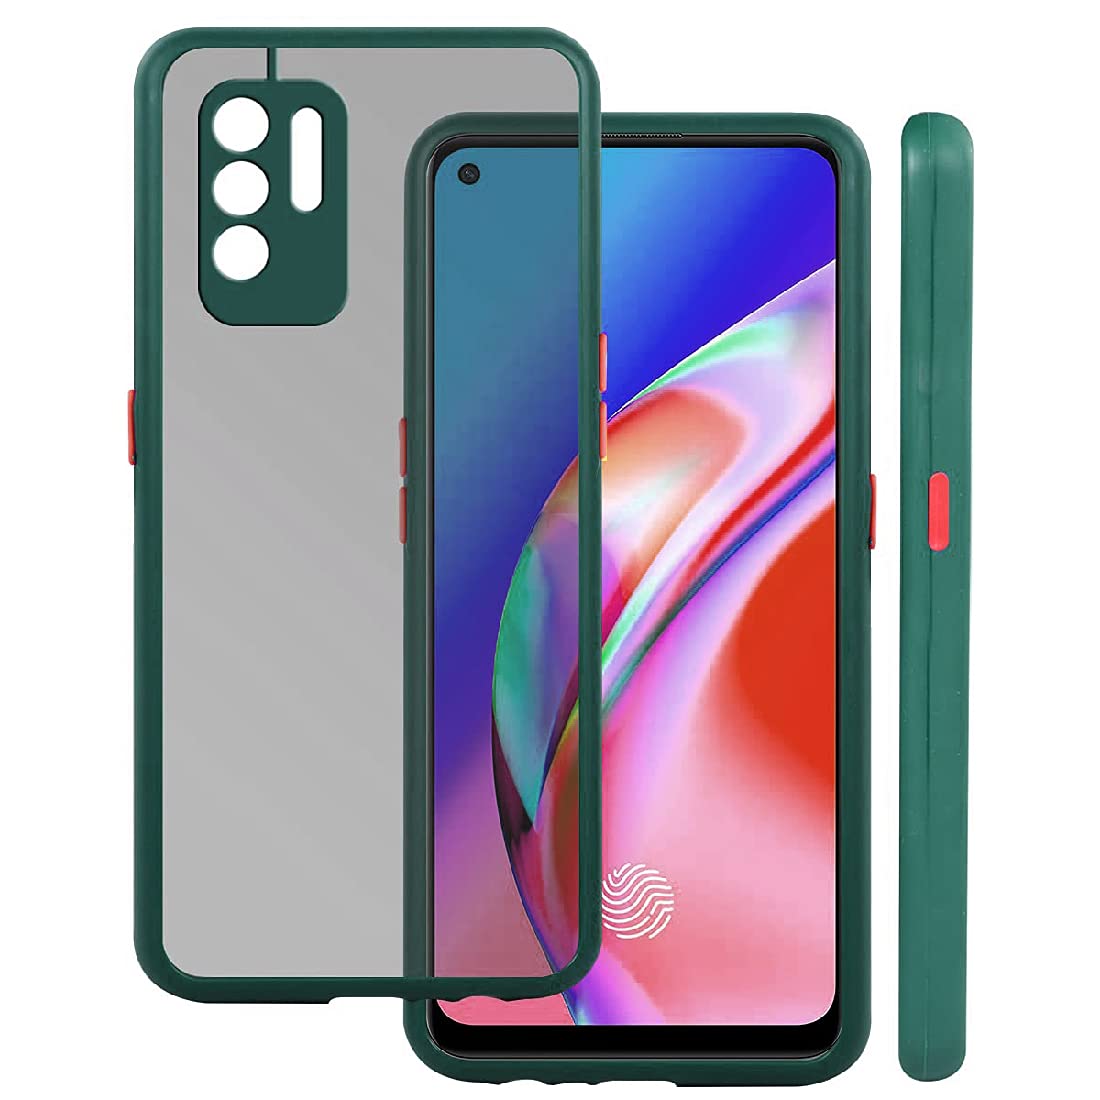 Smoke Back Case Cover for Oppo F19 Pro Plus 5G